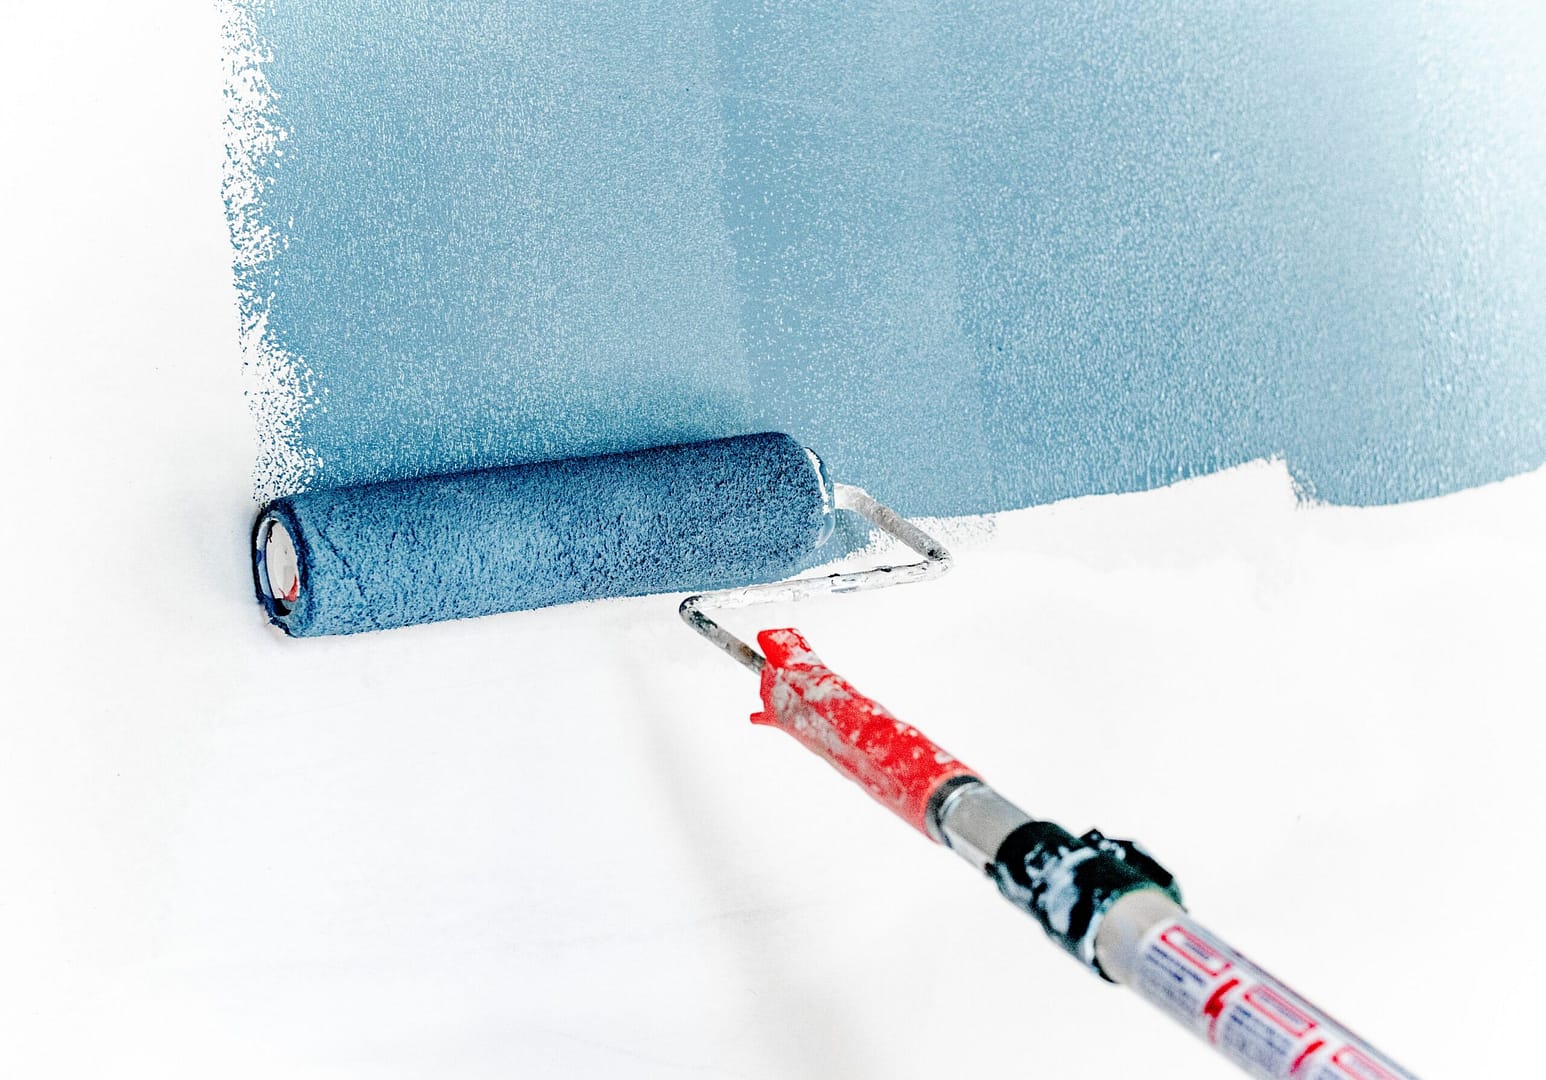 Applying a soothing shade of blue paint to a wall with a roller brush.